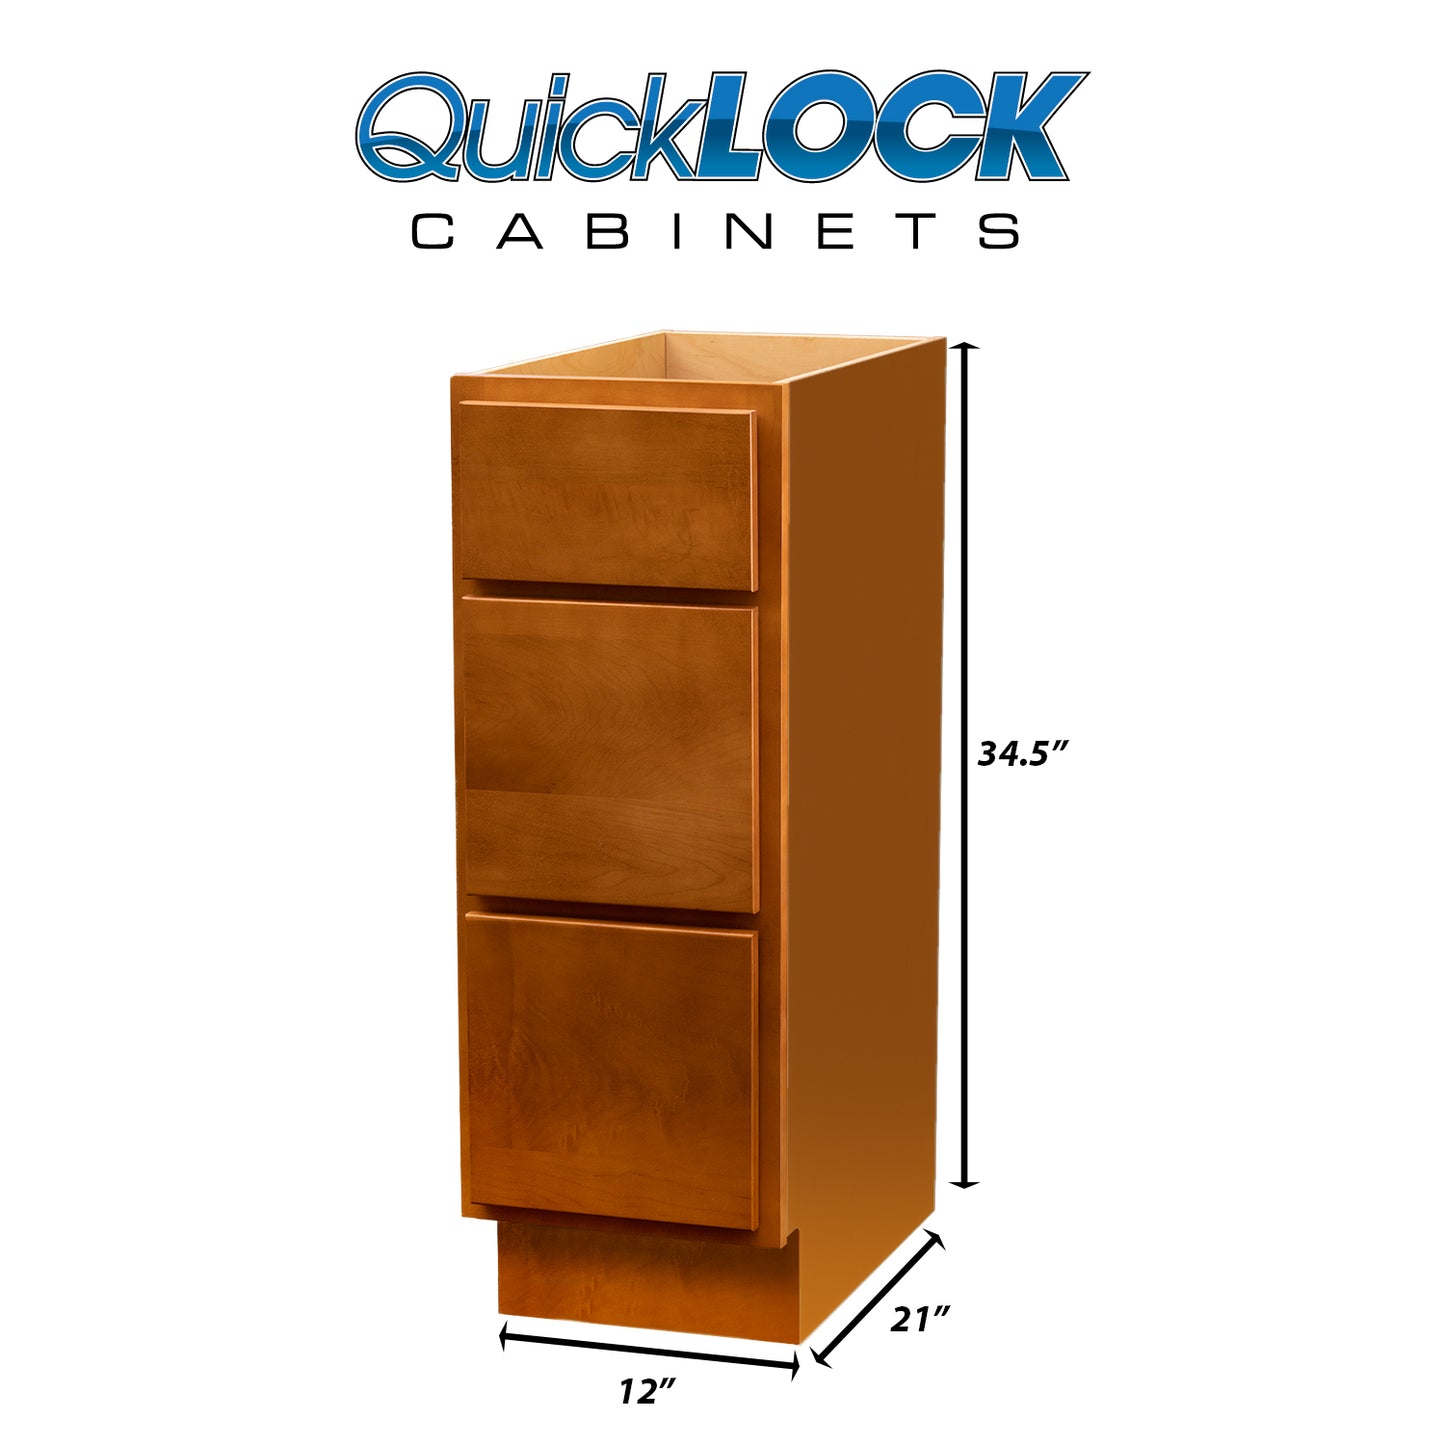 Quicklock RTA (Ready-to-Assemble) Provincial Stain 3 Drawer Vanity Base Cabinet | 12"Wx34.5"Hx21"D